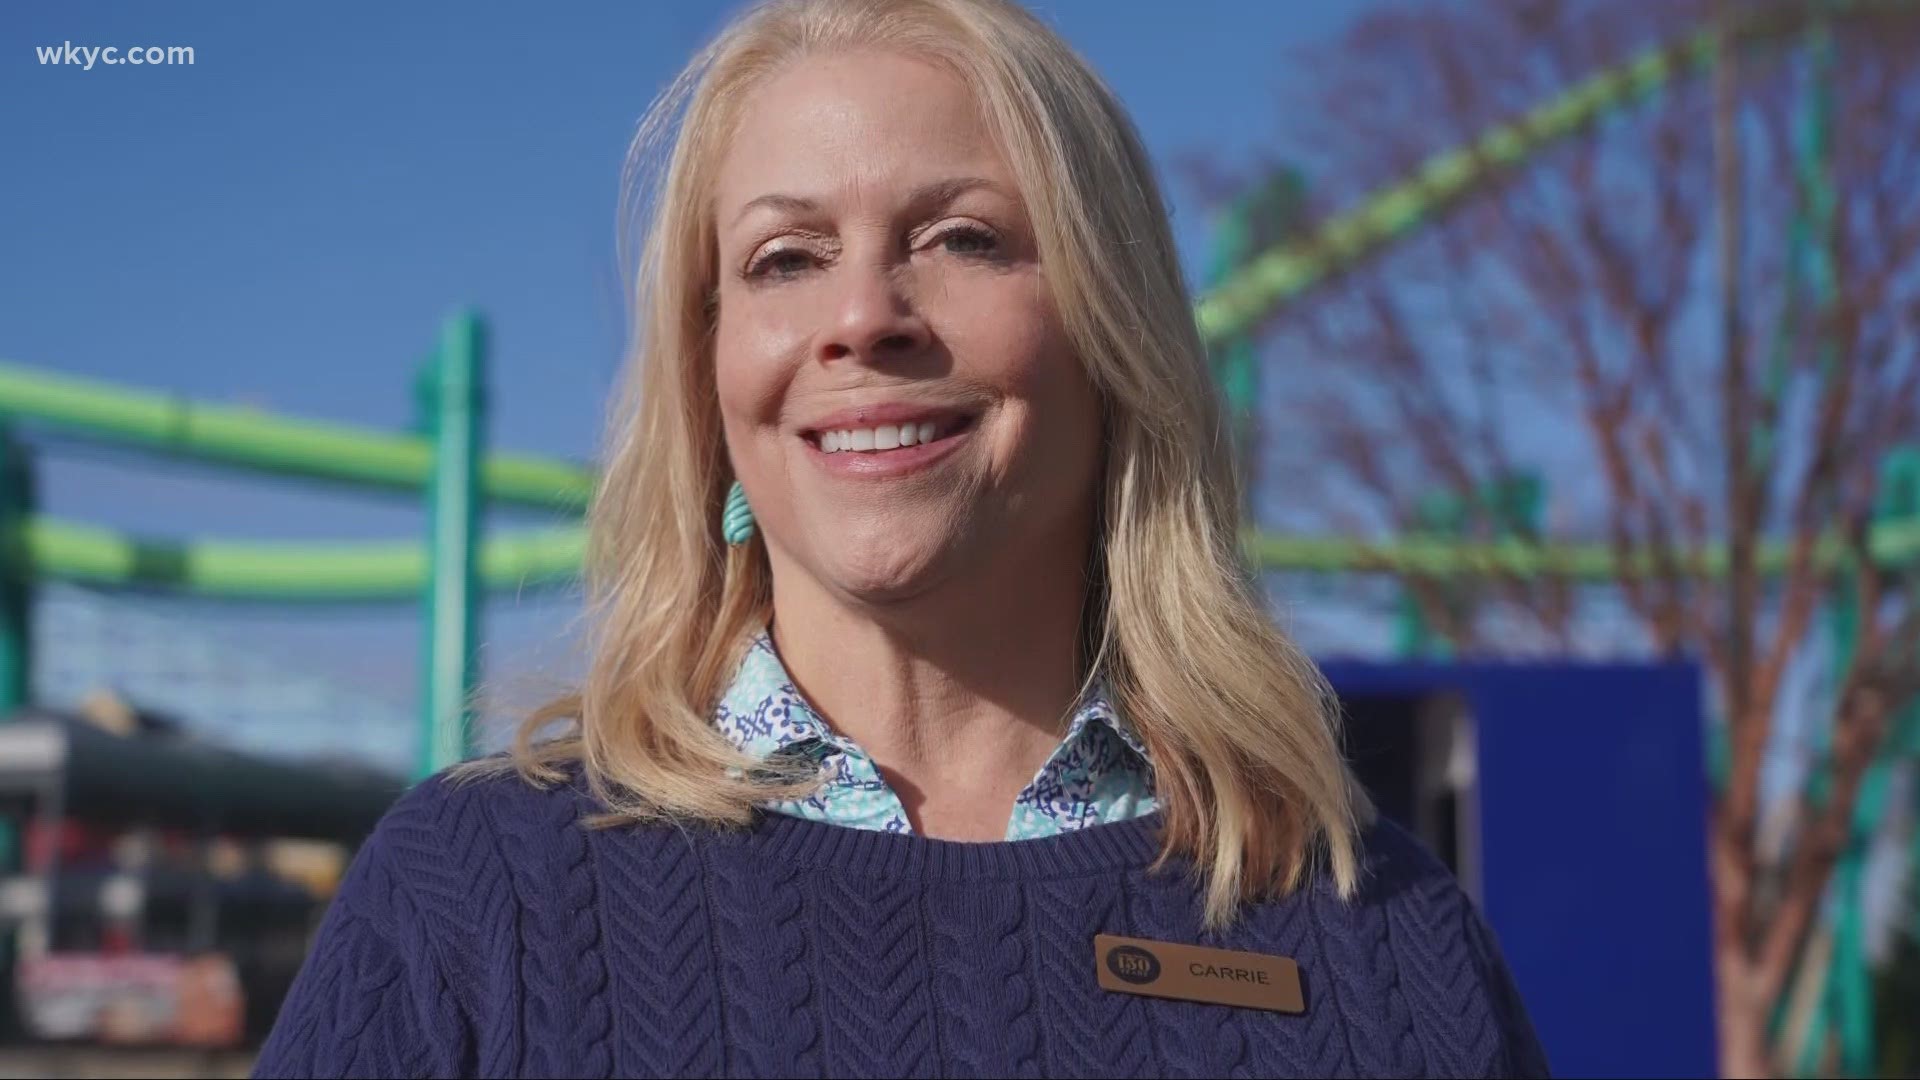 Carrie Boldman’s first job at Cedar Point was a few dozen feet and a few decades away. Boldman was just named Vice President and General Manager in April.